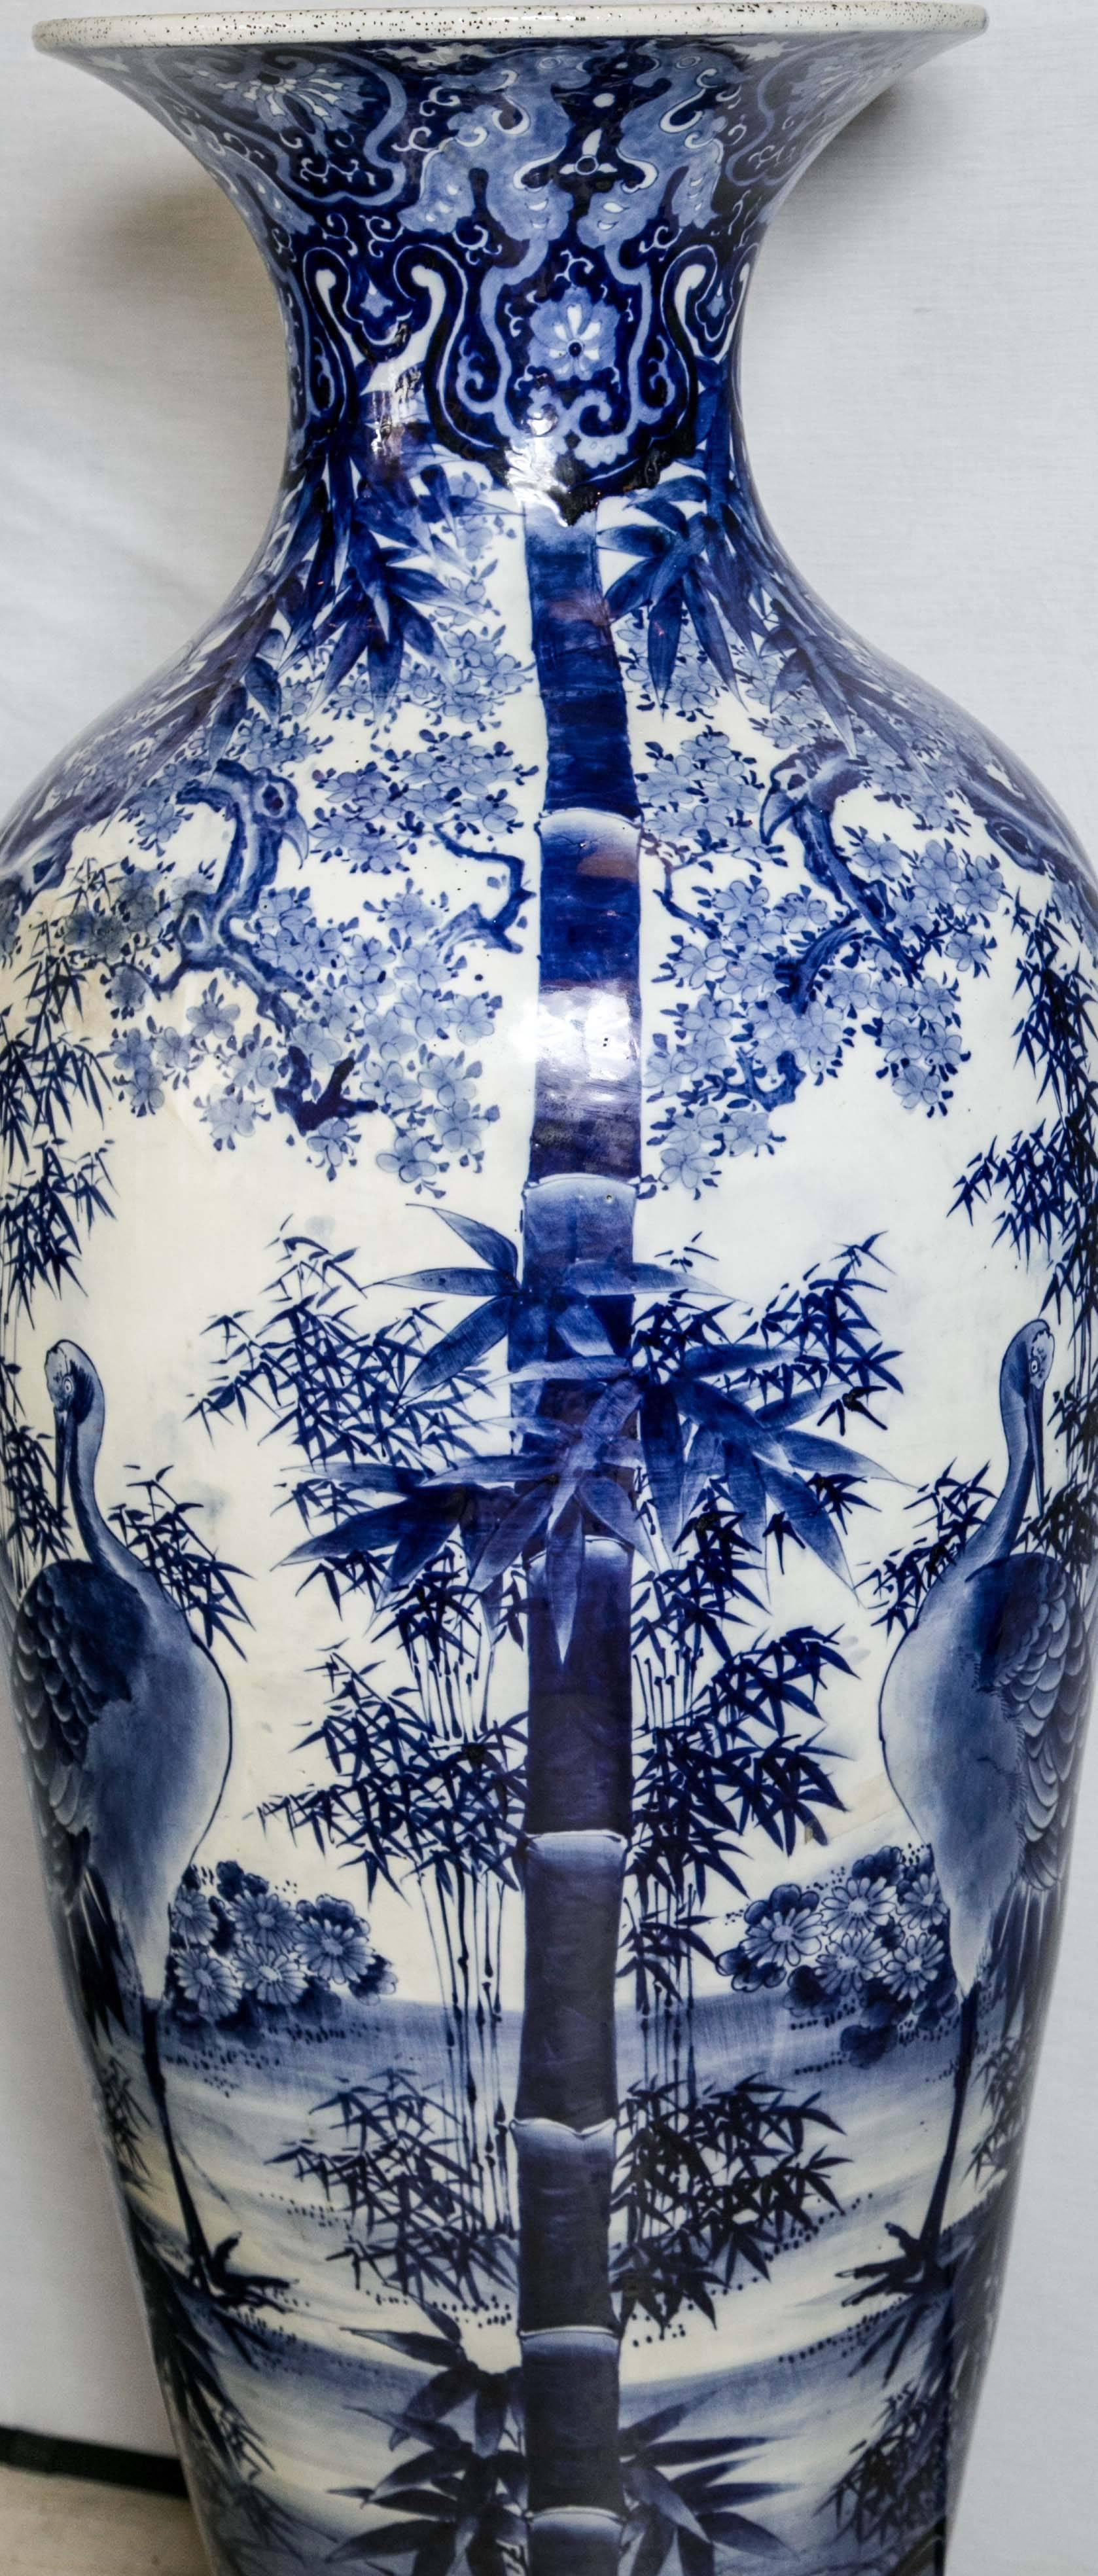 Japanese Blue and White Porcelain Floor Vase In Excellent Condition For Sale In Woodbury, CT